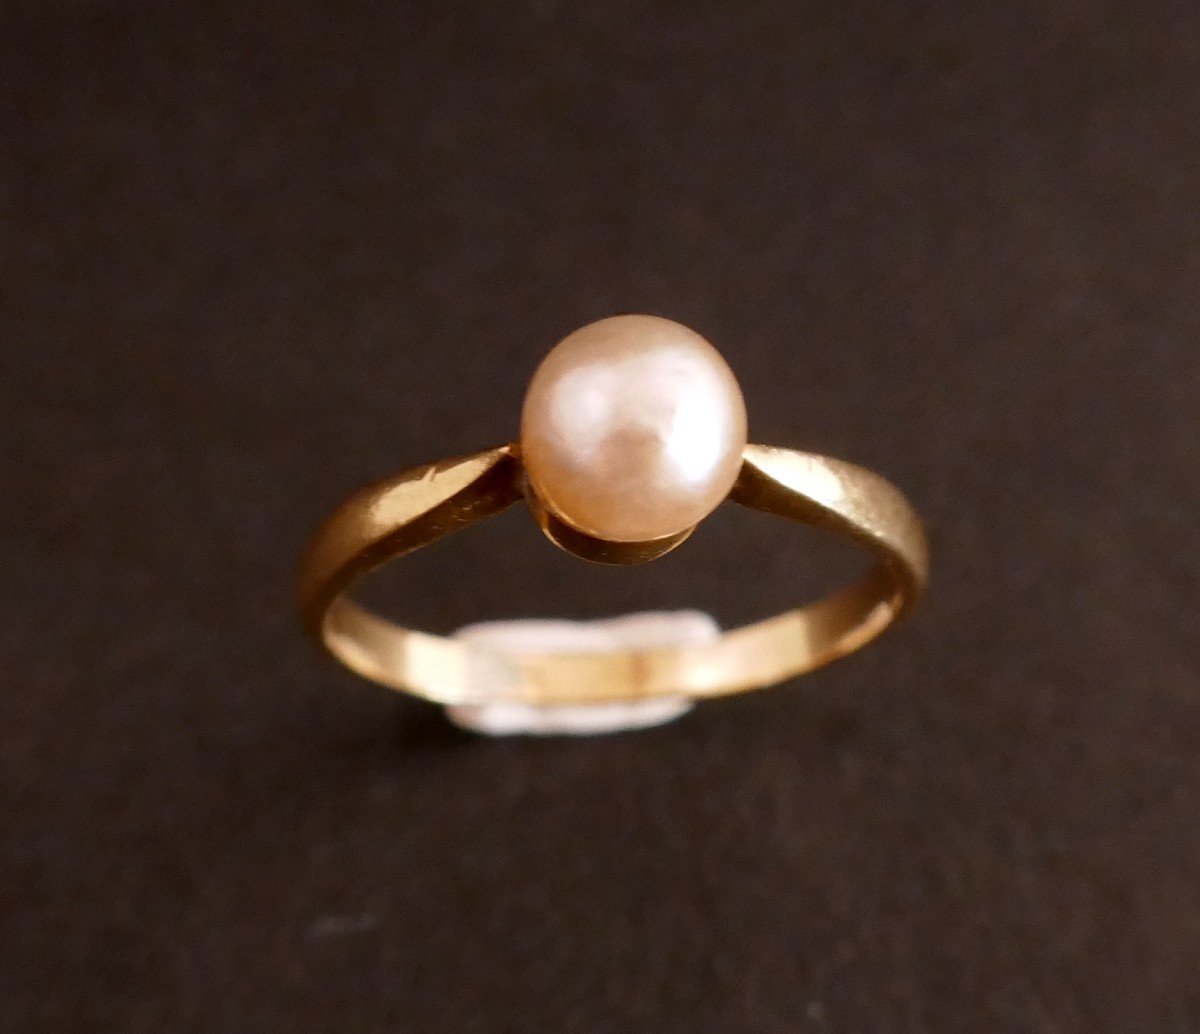 Ring Set With A Cultured Pearl, 18k Gold.